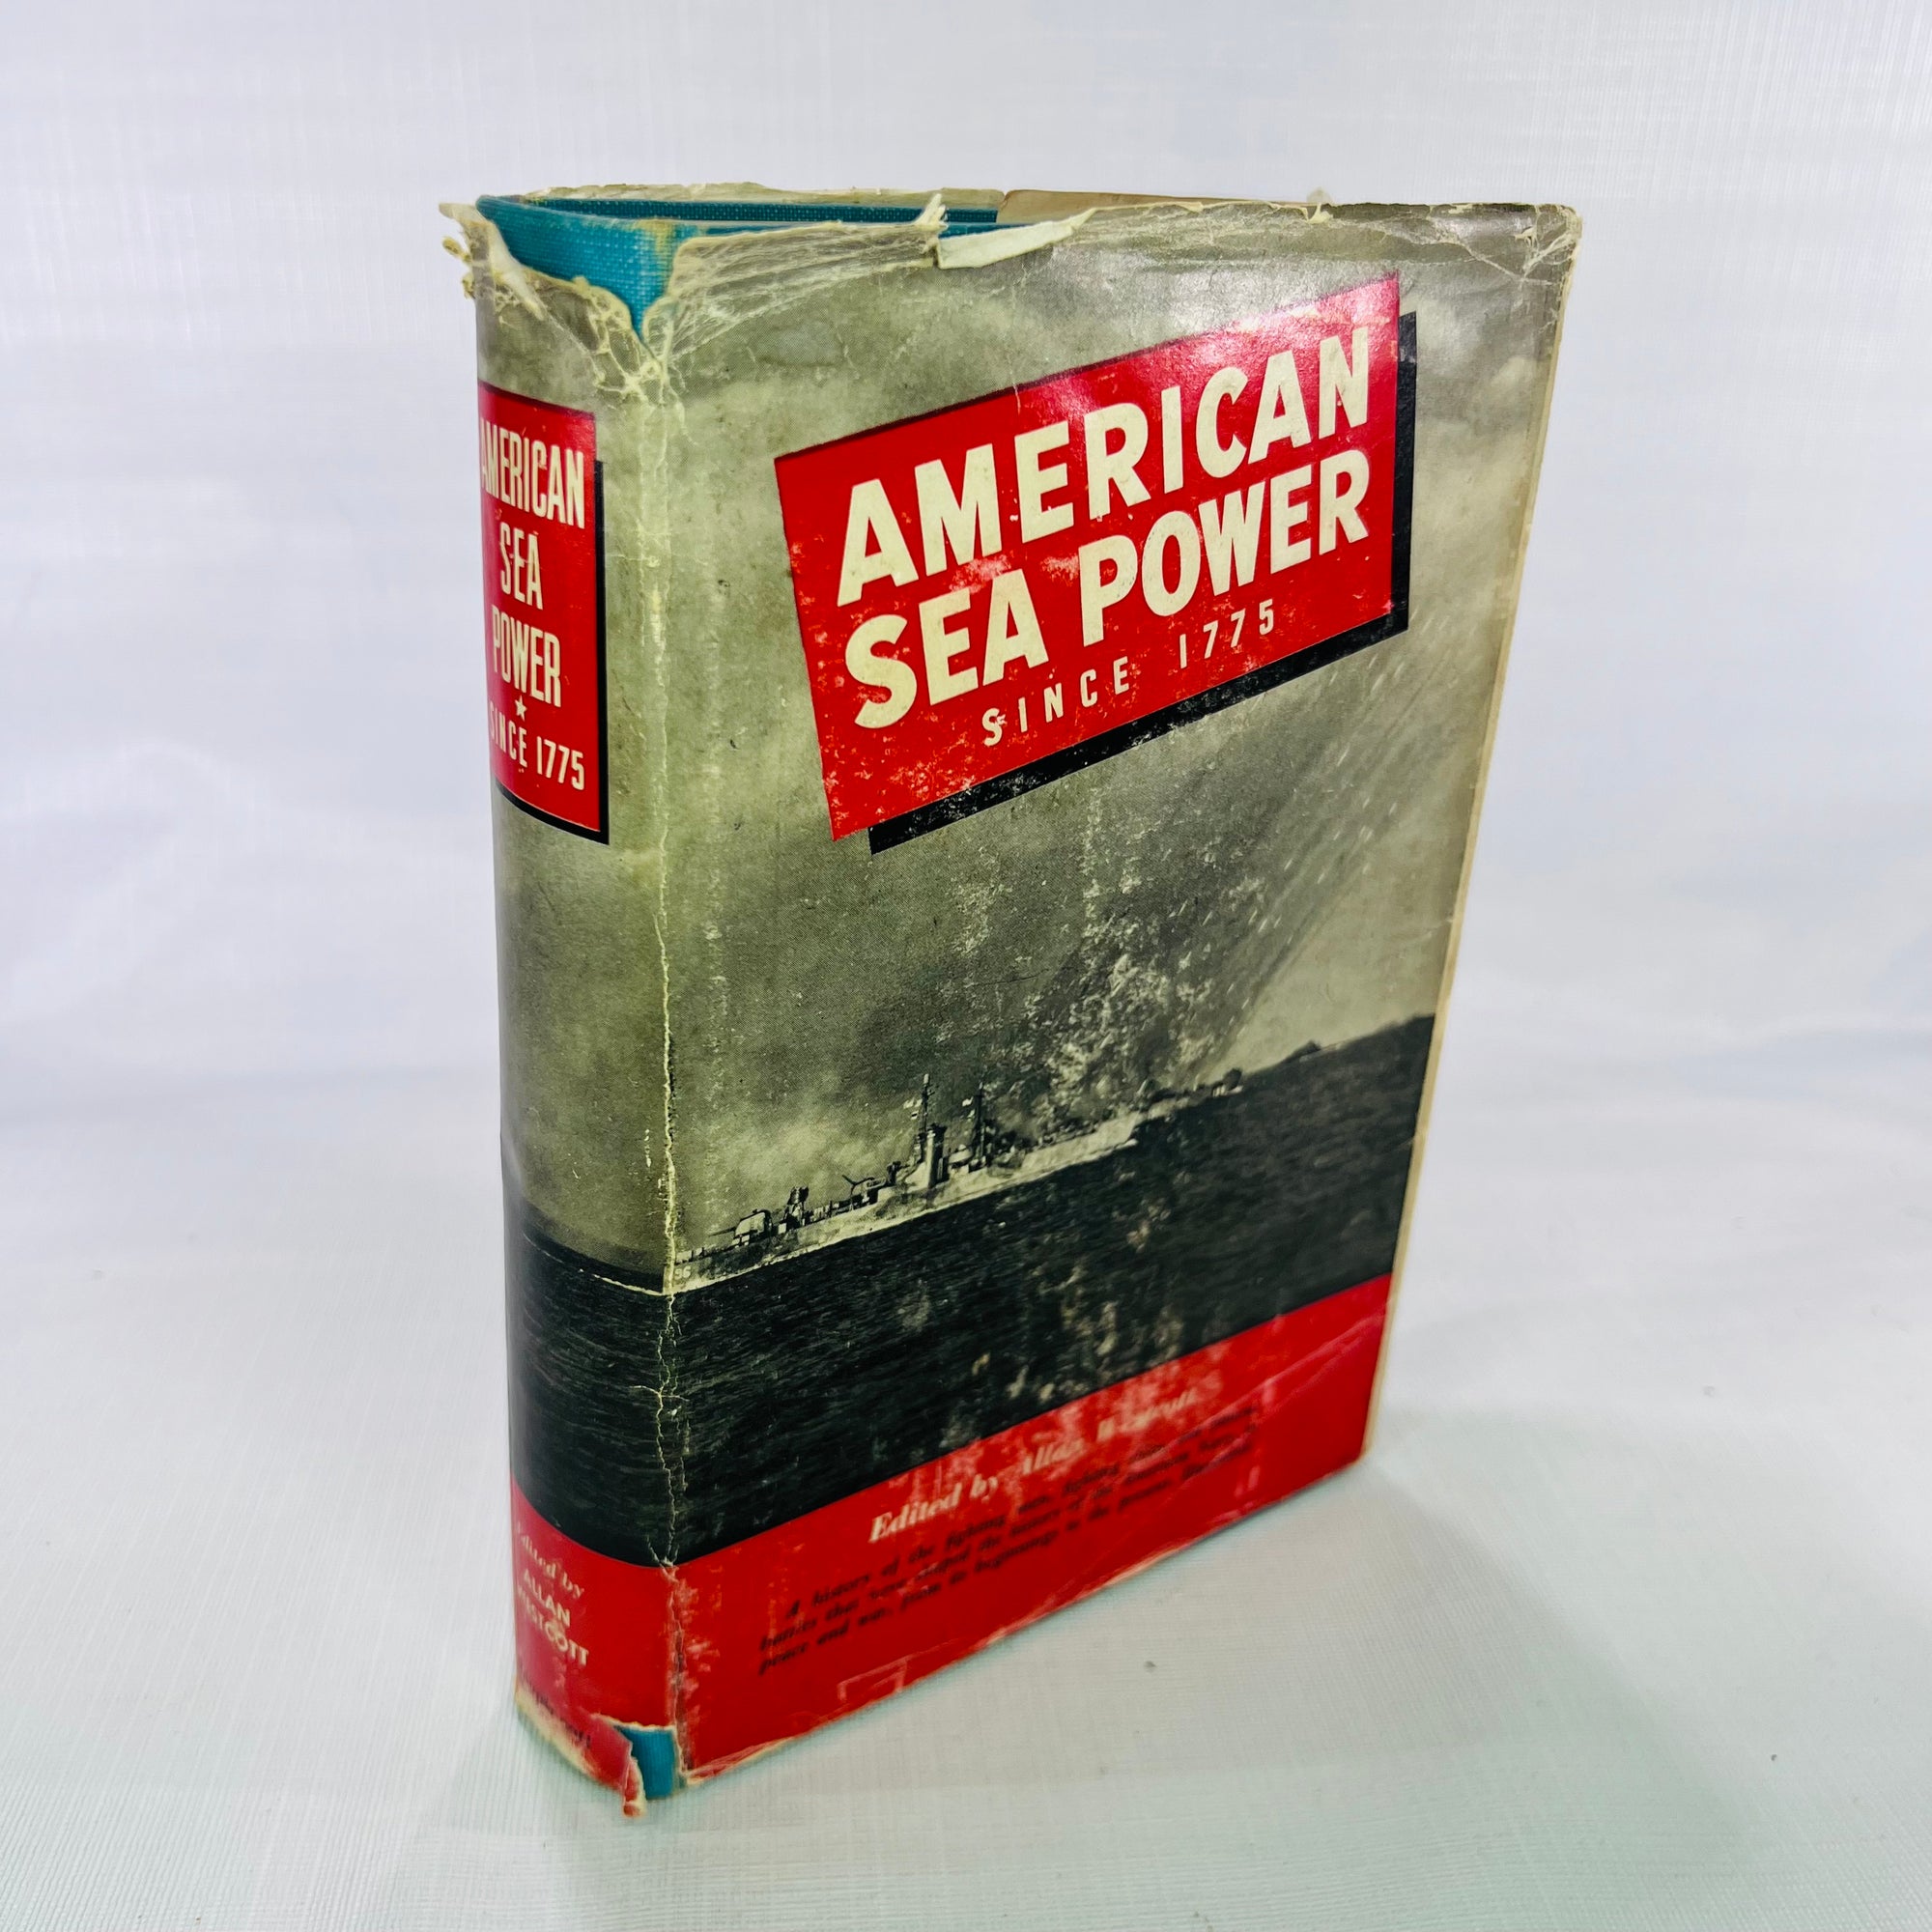 American Sea Power since 1775 by Members of the United States Navel Academy 1947 J.B. Lippincott Company